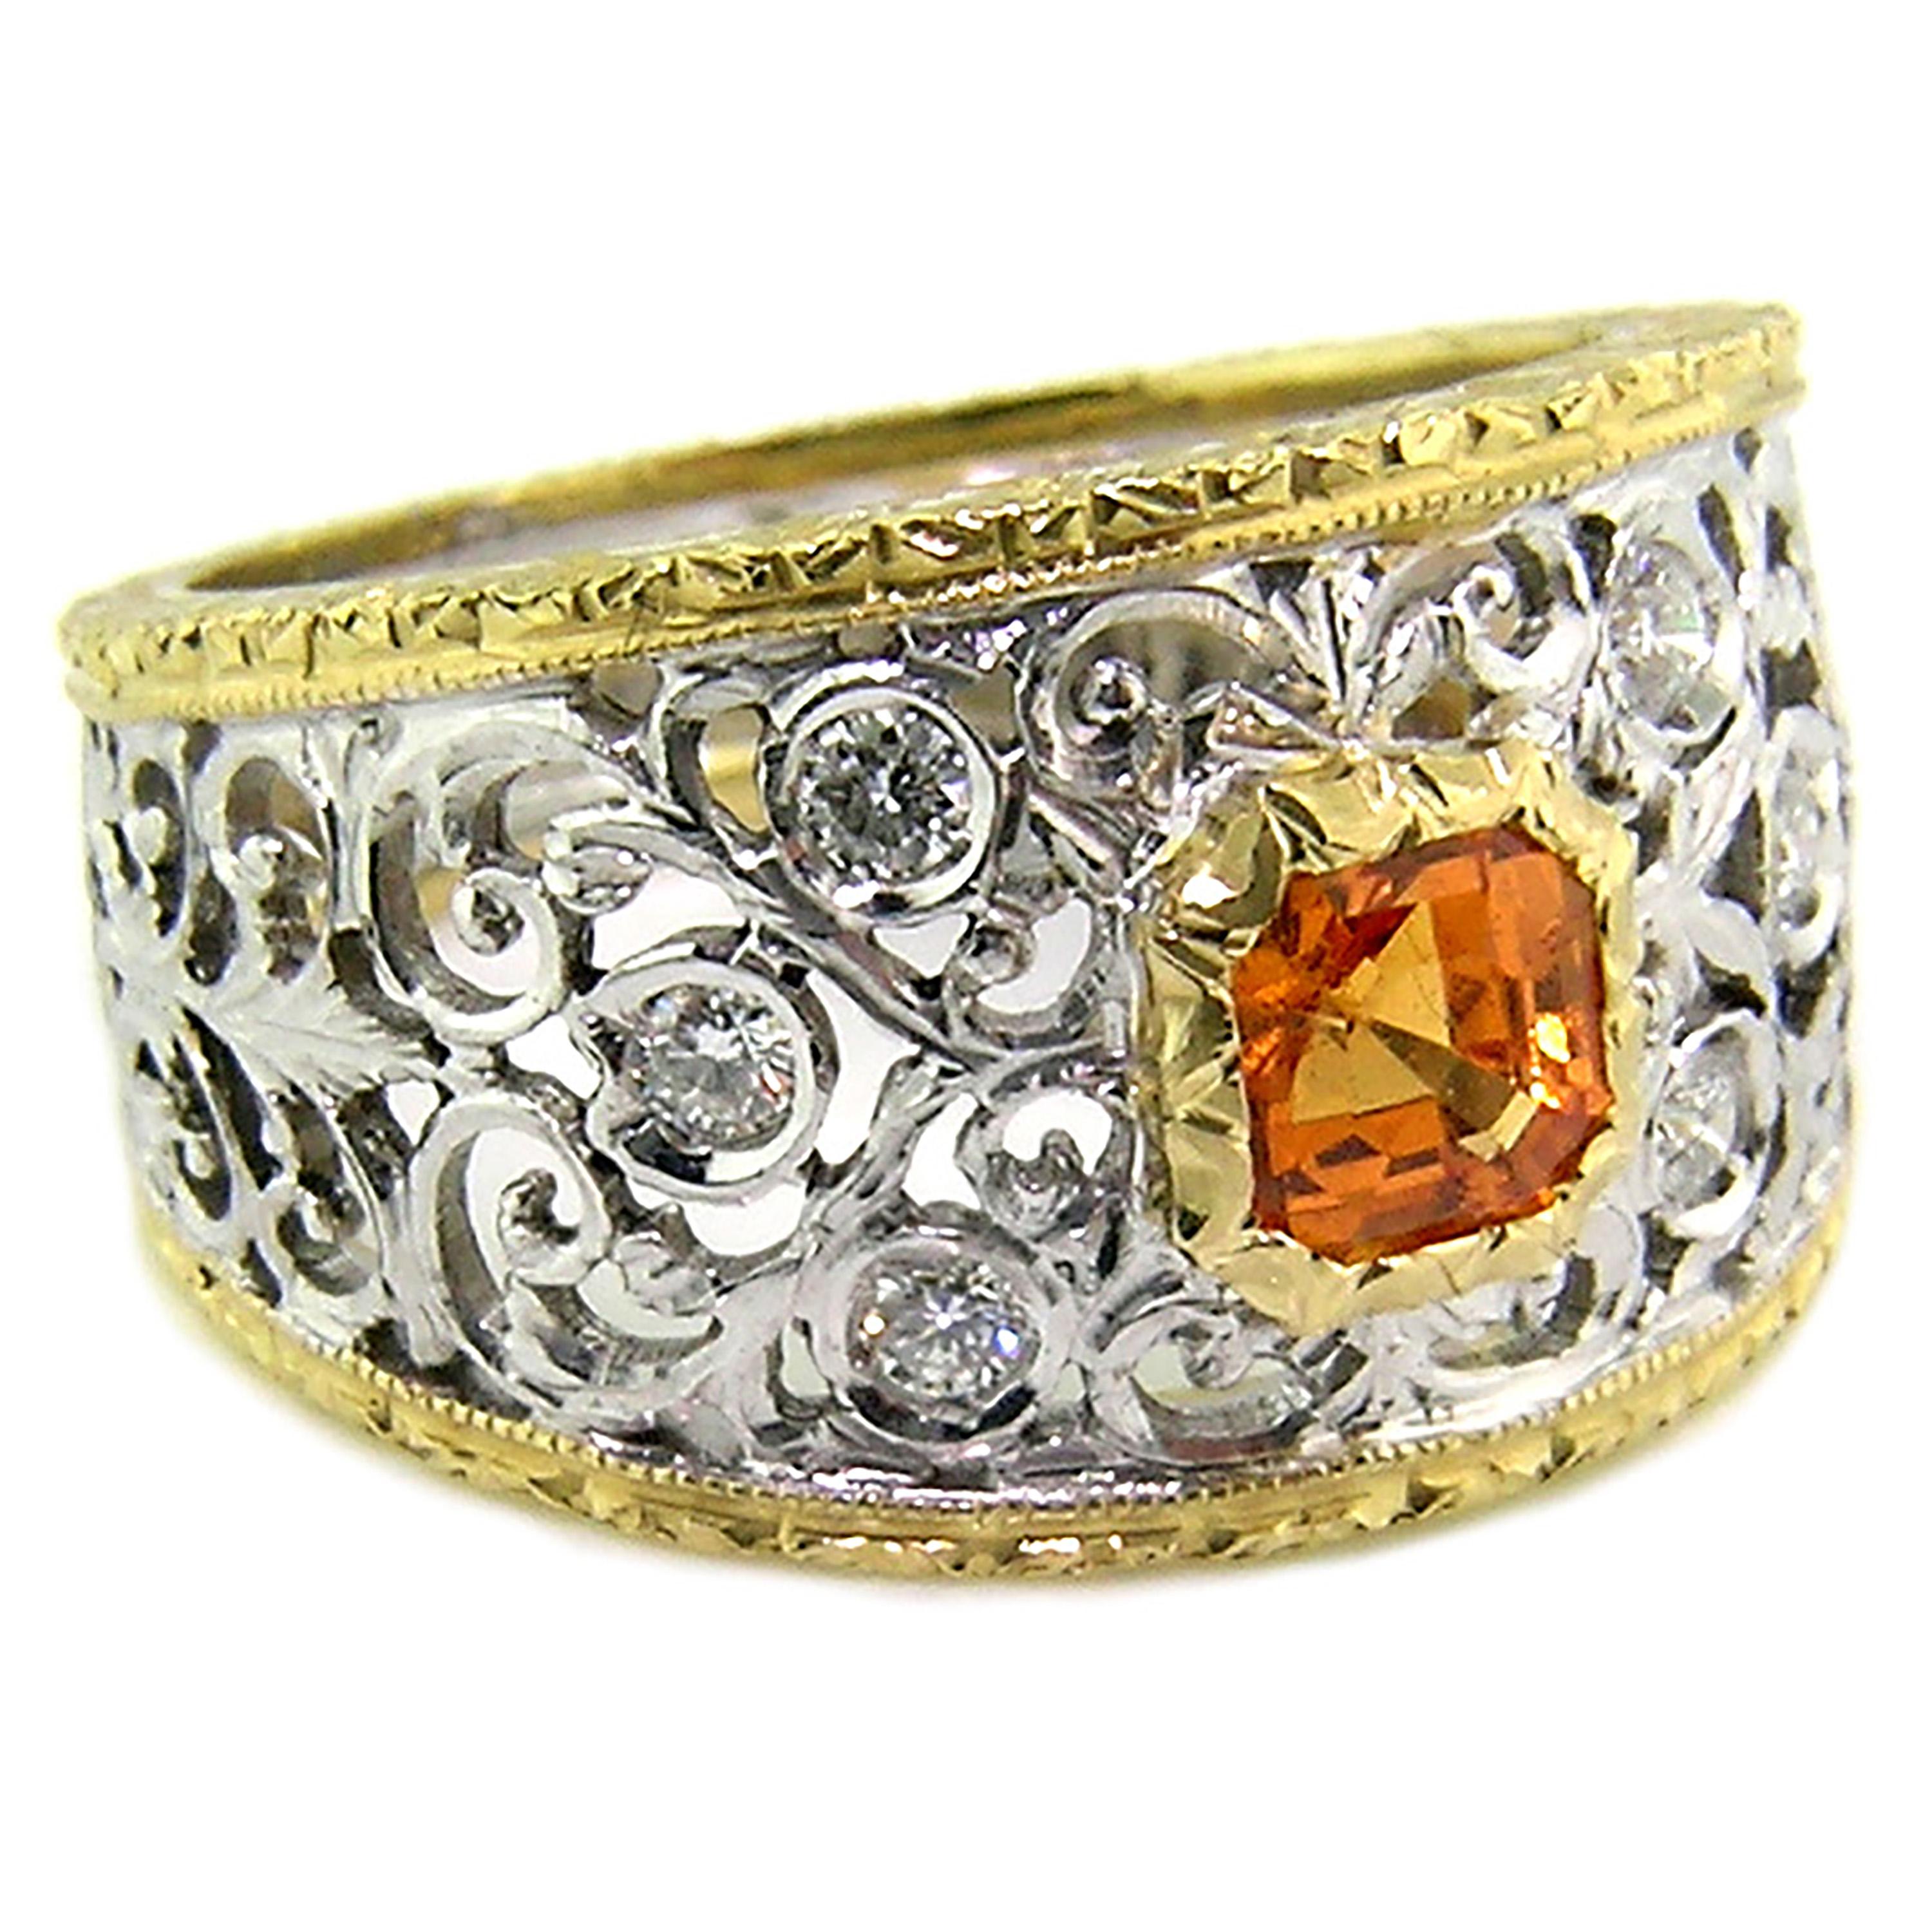 This lively Mandarin garnet sizzles with bright and brilliant color. The warmth and intensity of this spessartite garnet is harnessed perfectly by the elegantly executed cut. By definition, this garnet is a completely natural color with no